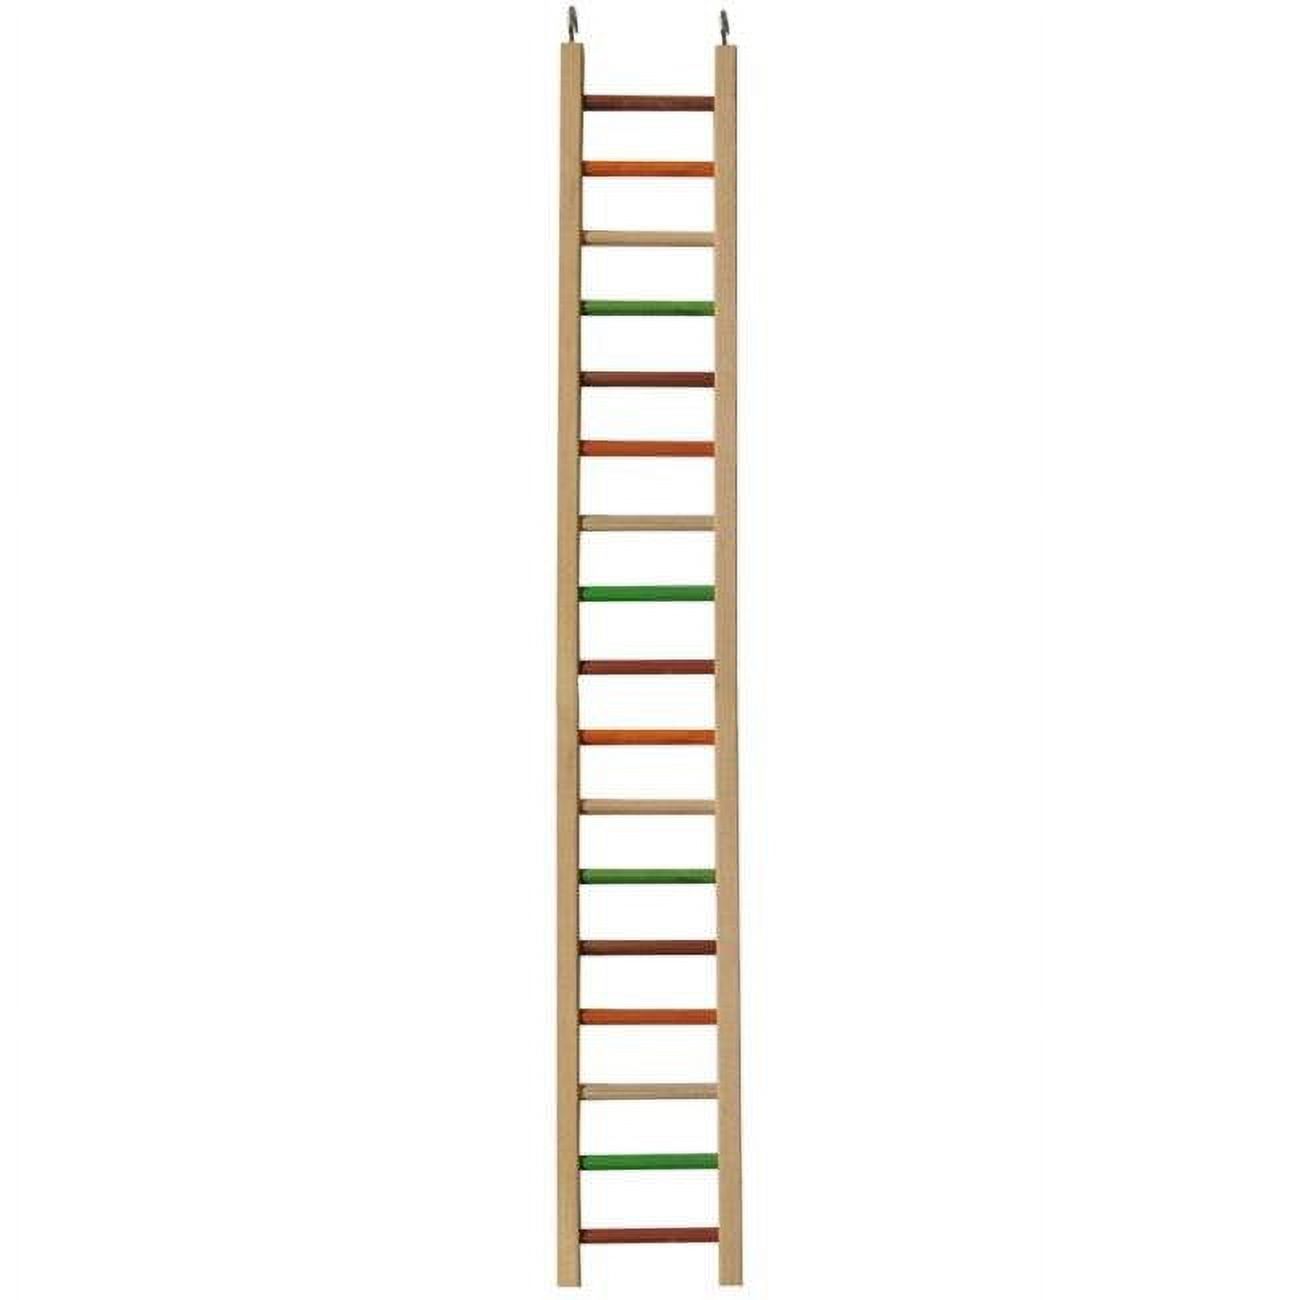 Wooden Hanging Ladder - 38 x 5.25 - 0.5 in. - image 1 of 1